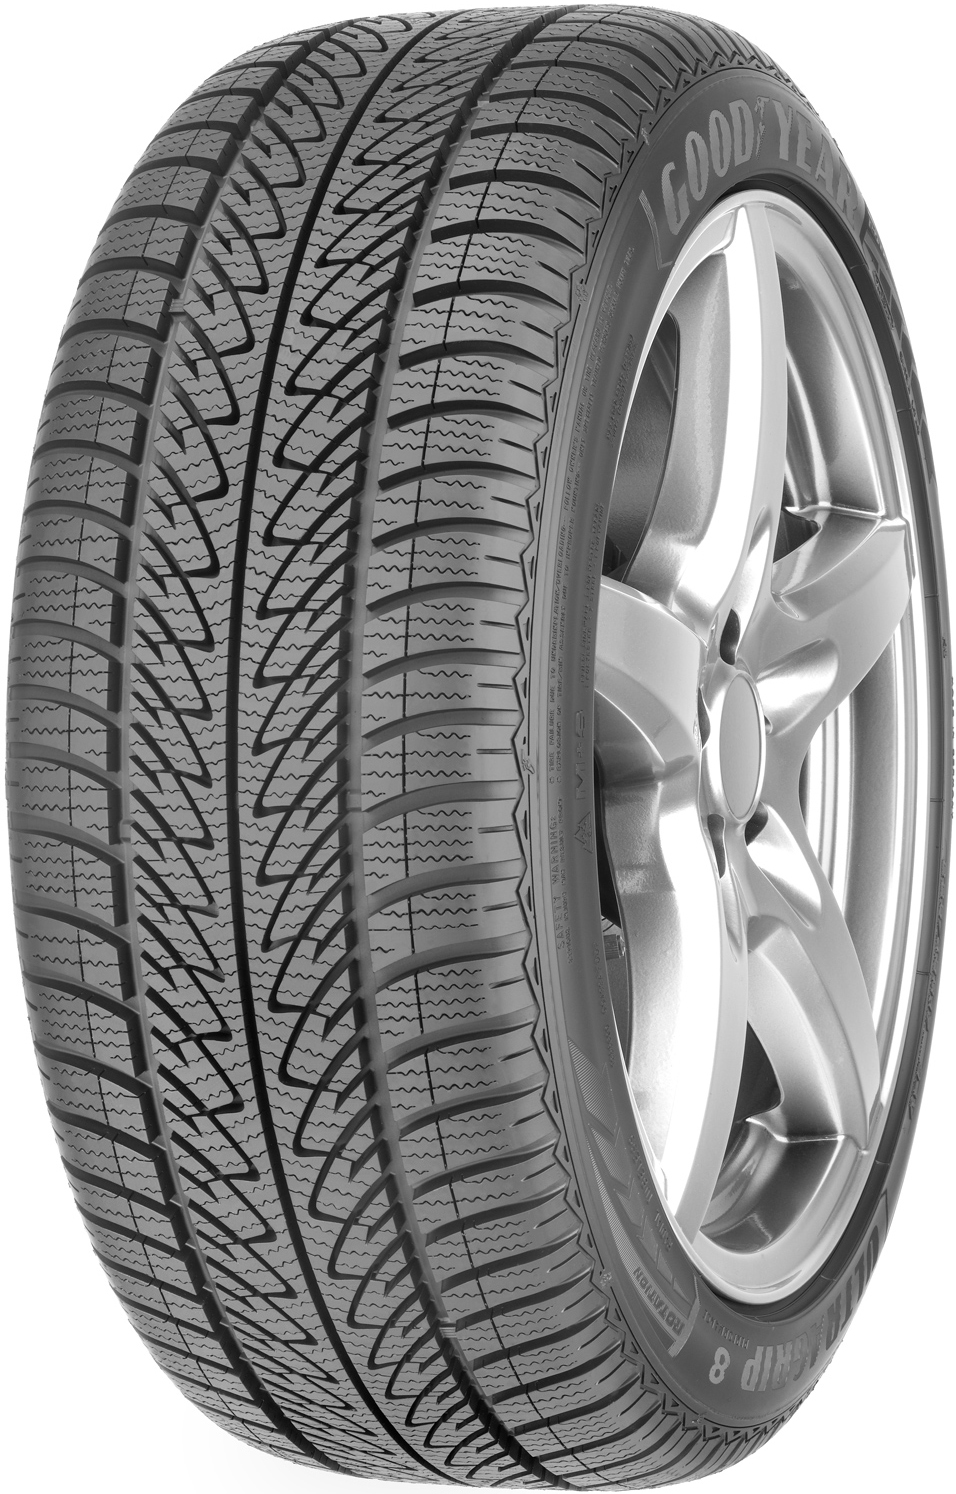 Anvelope auto GOODYEAR ULTRA GRIP 8 PERFOMANCE XL FP 235/55 R18 104